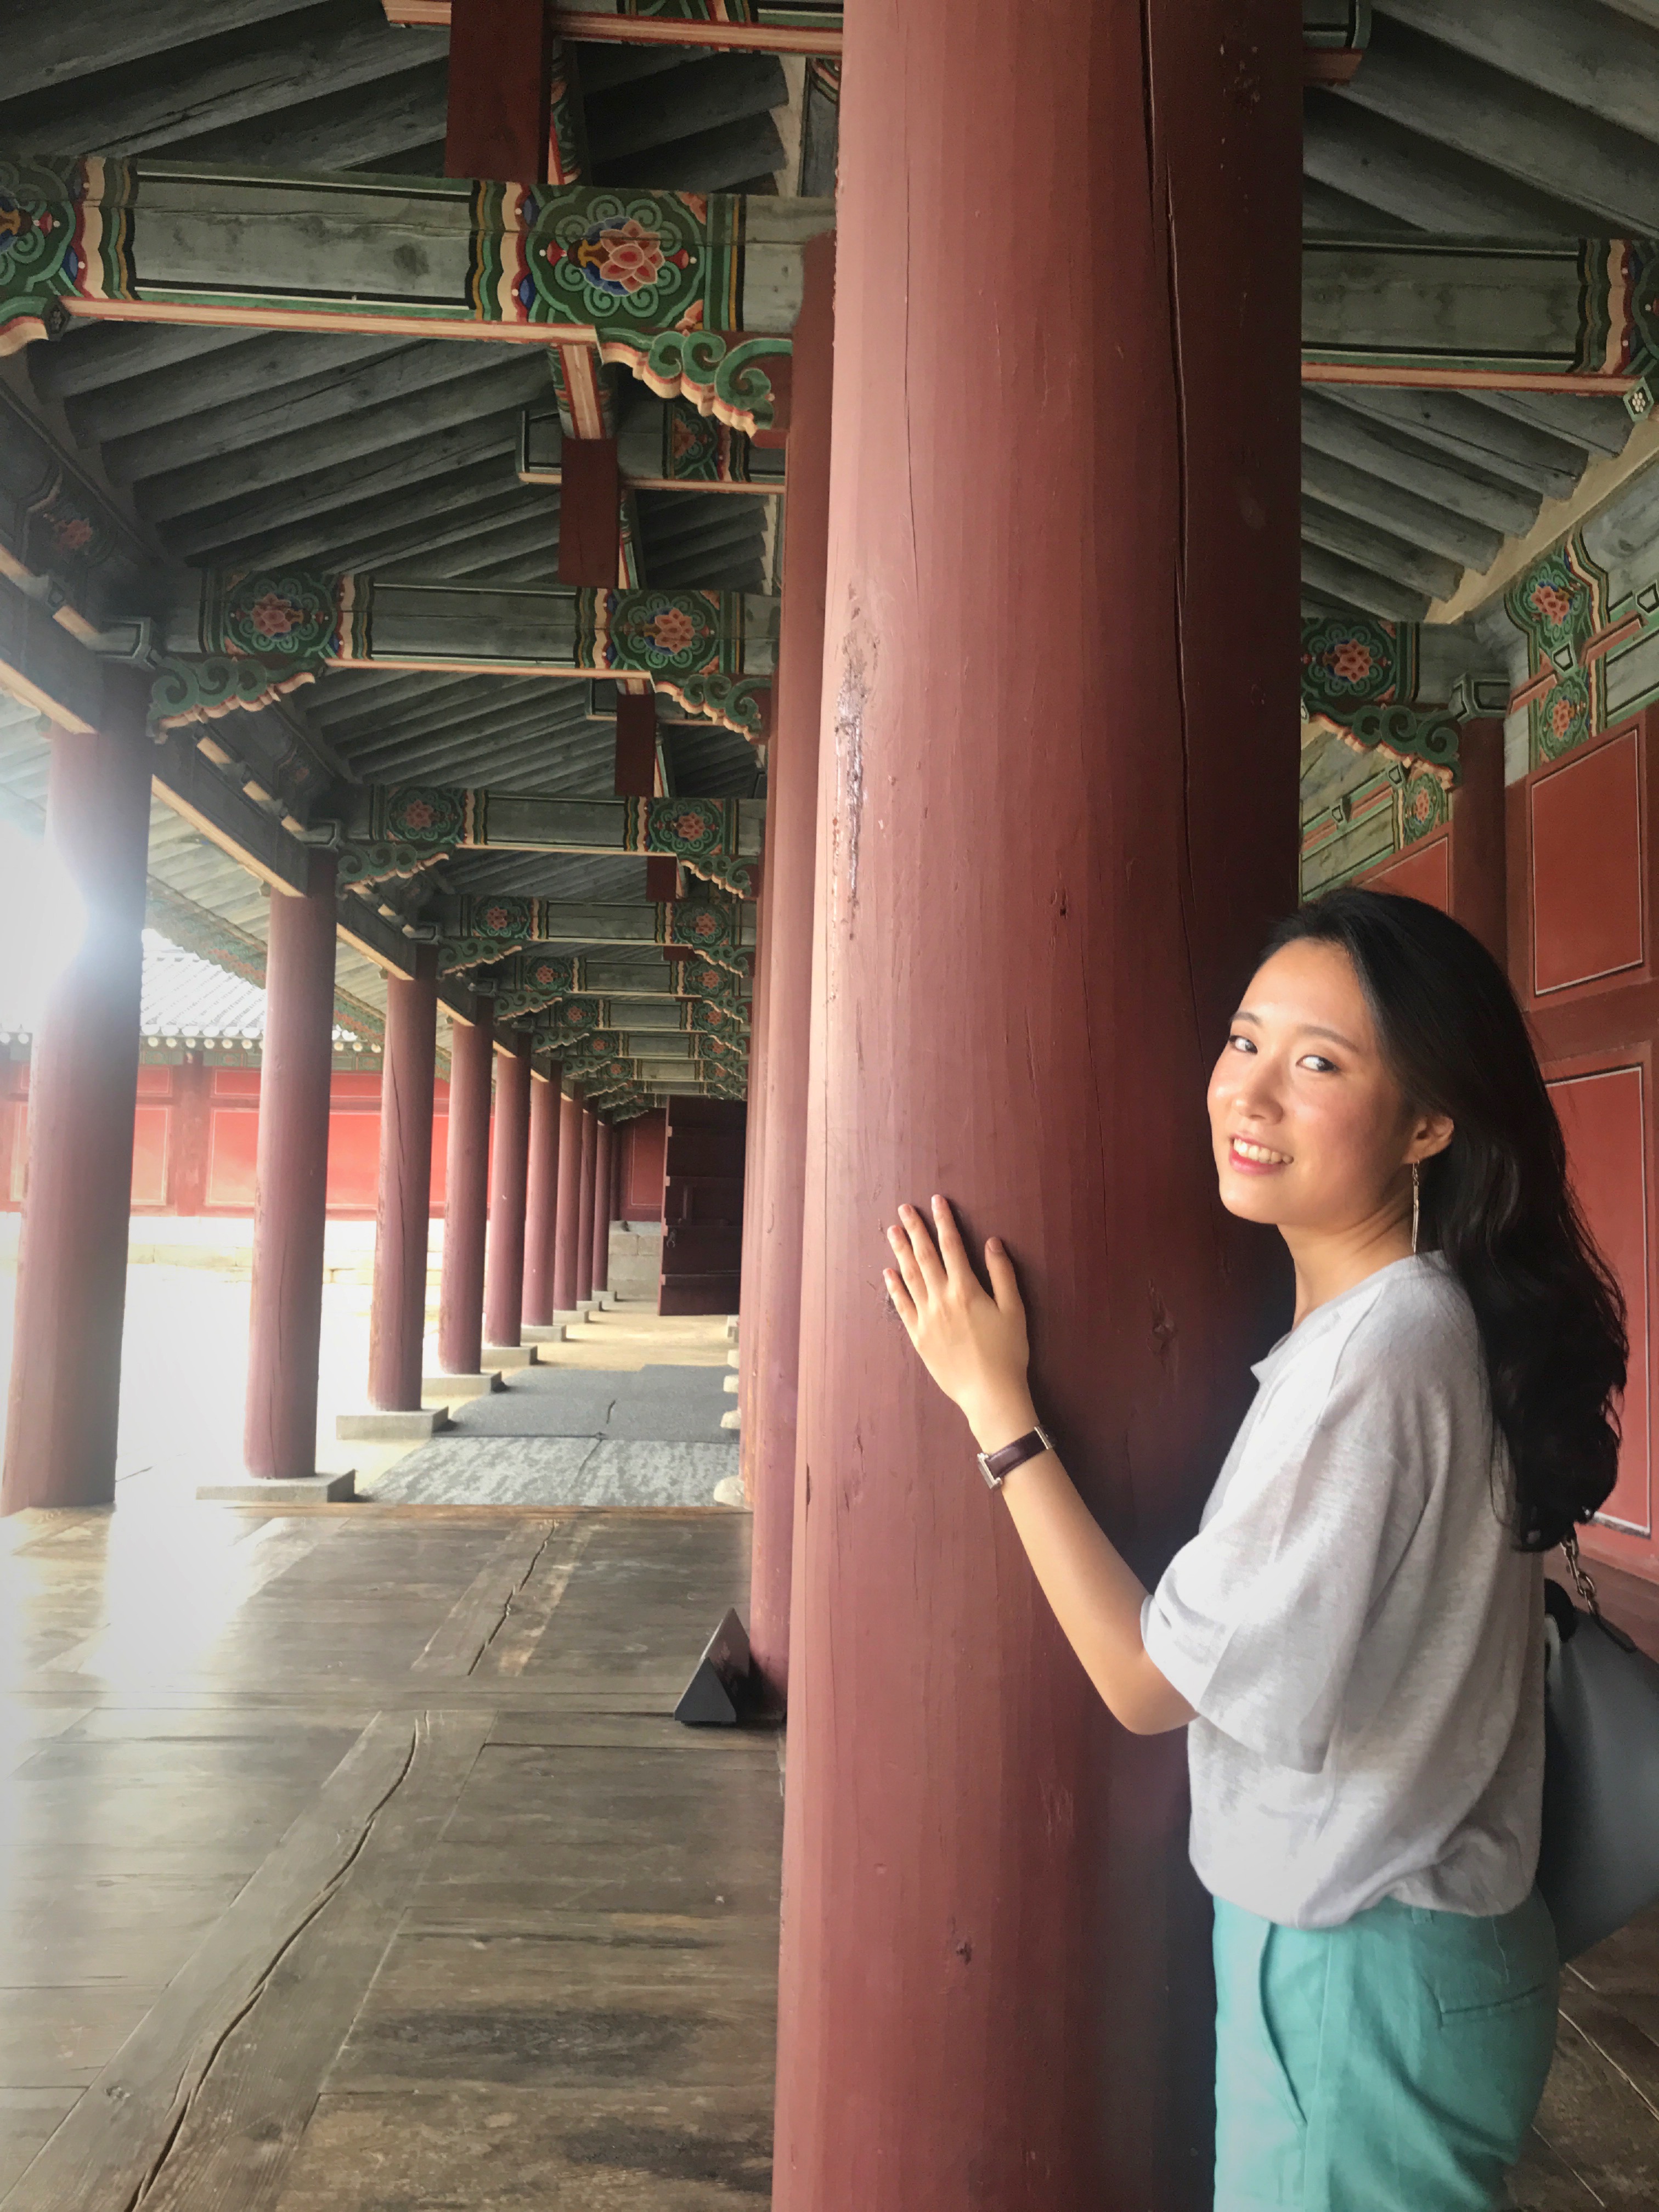 A young Asian woman with long black hair is leaning against a pillar in the Korean palace's hallway.